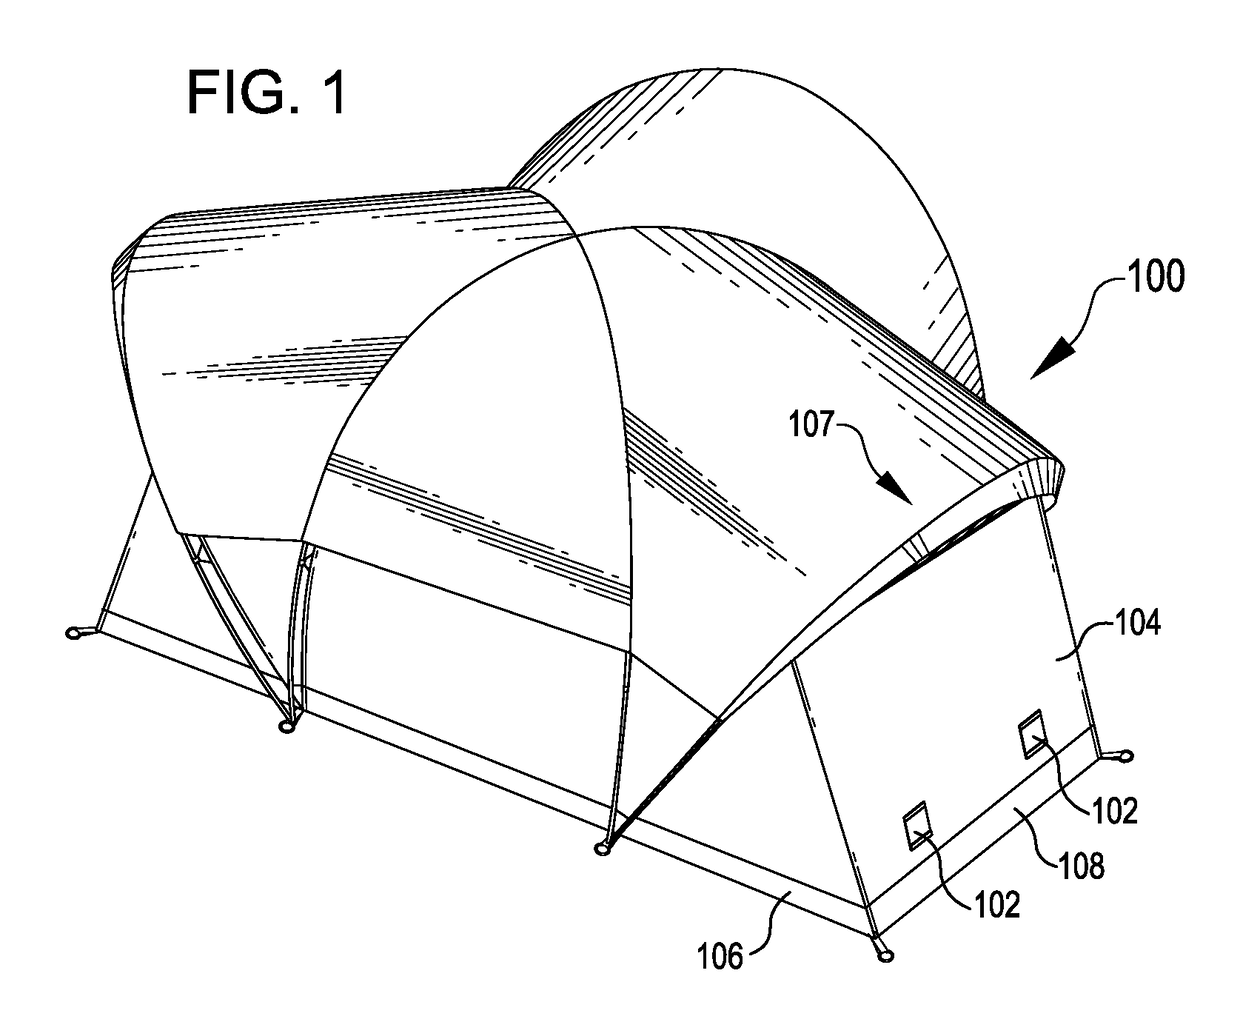 Vent control system for tent